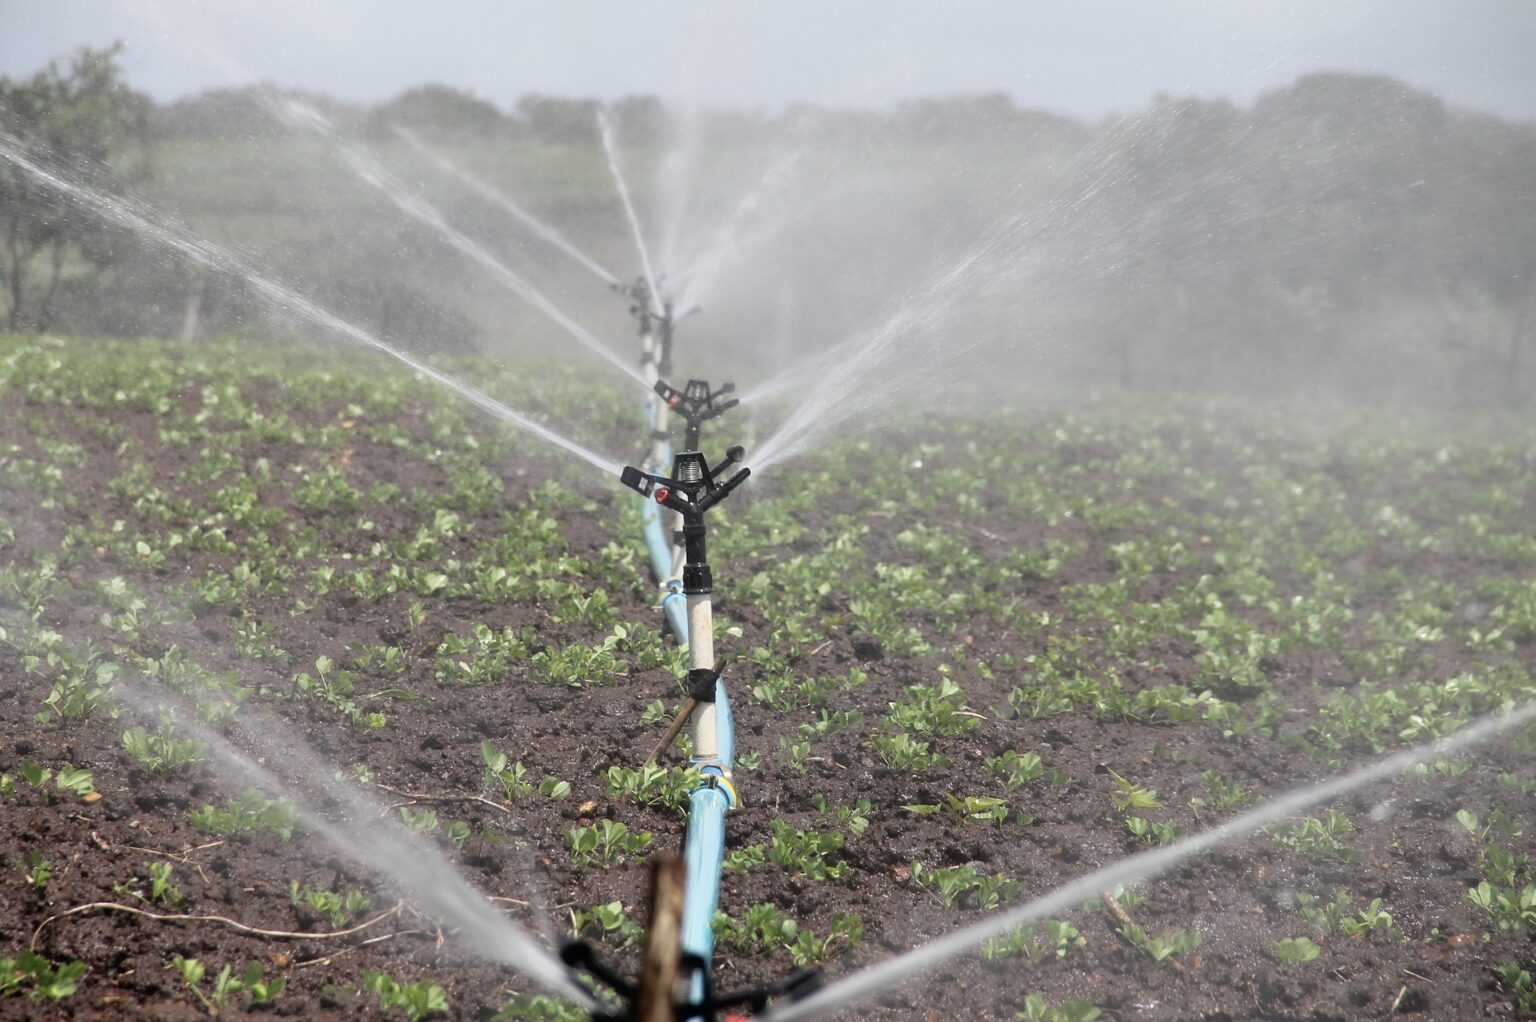 which of the following best describes the advantages and disadvantages of drip irrigation?